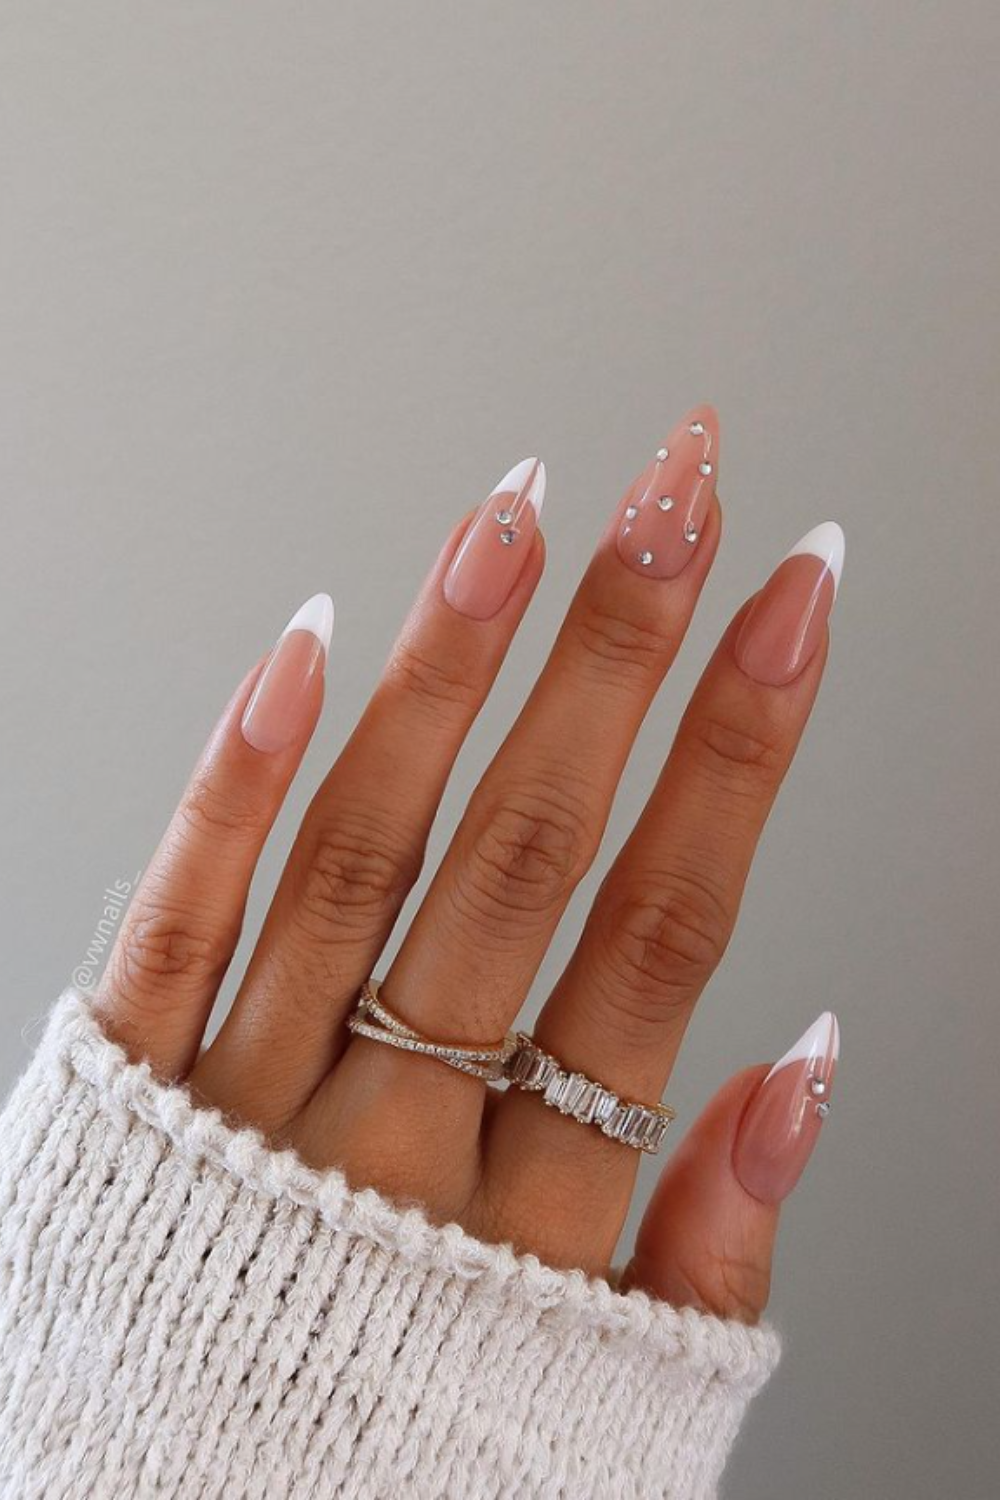 20 Aesthetic Nail Art Designs to Try This Summer